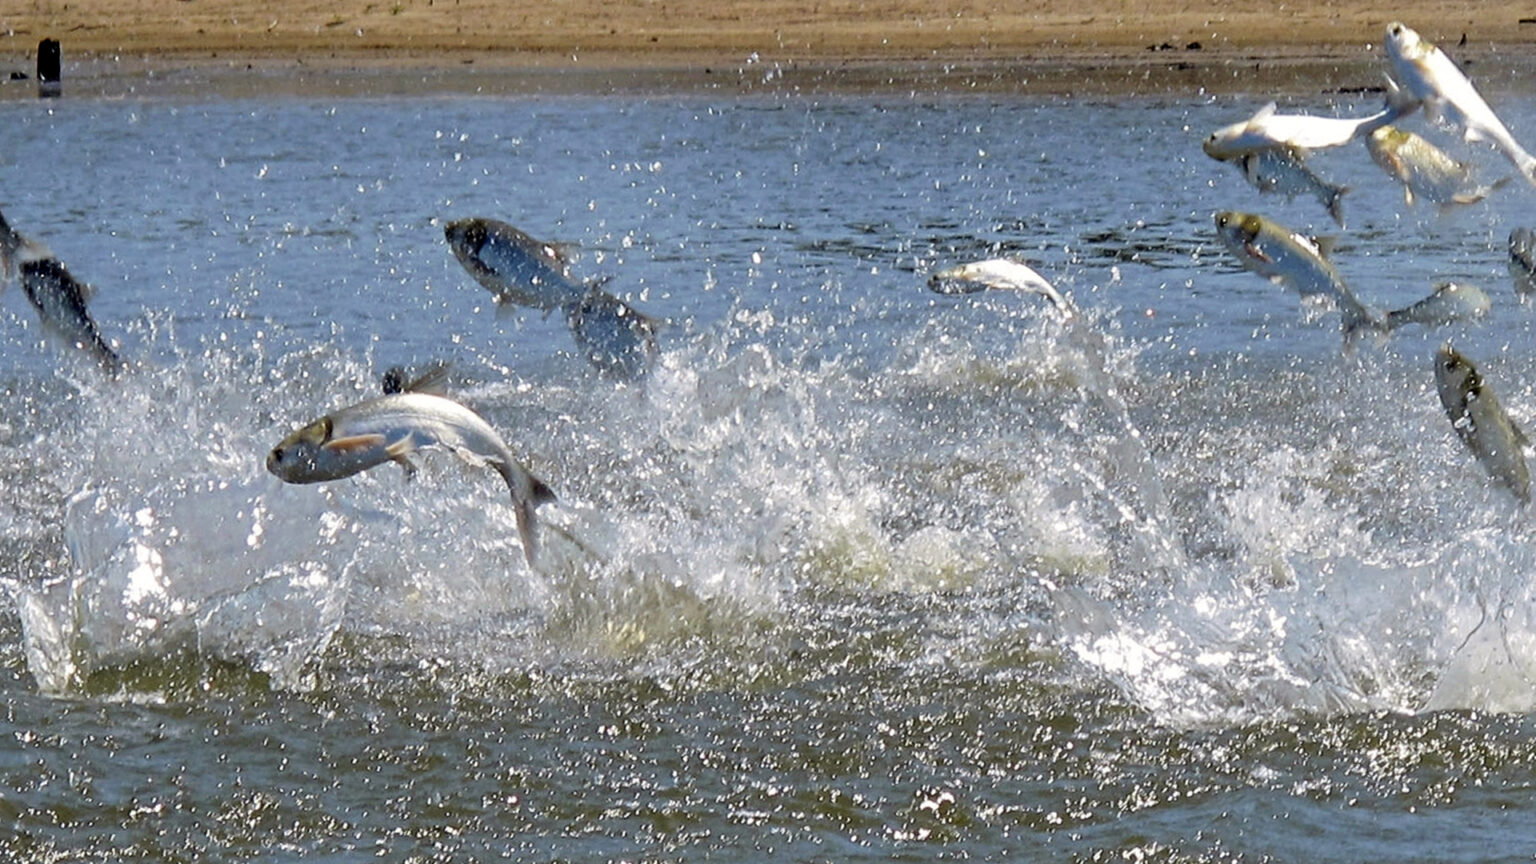 Multiple fish jump from the surface of a churning body of water, with a sandy beach in the background.